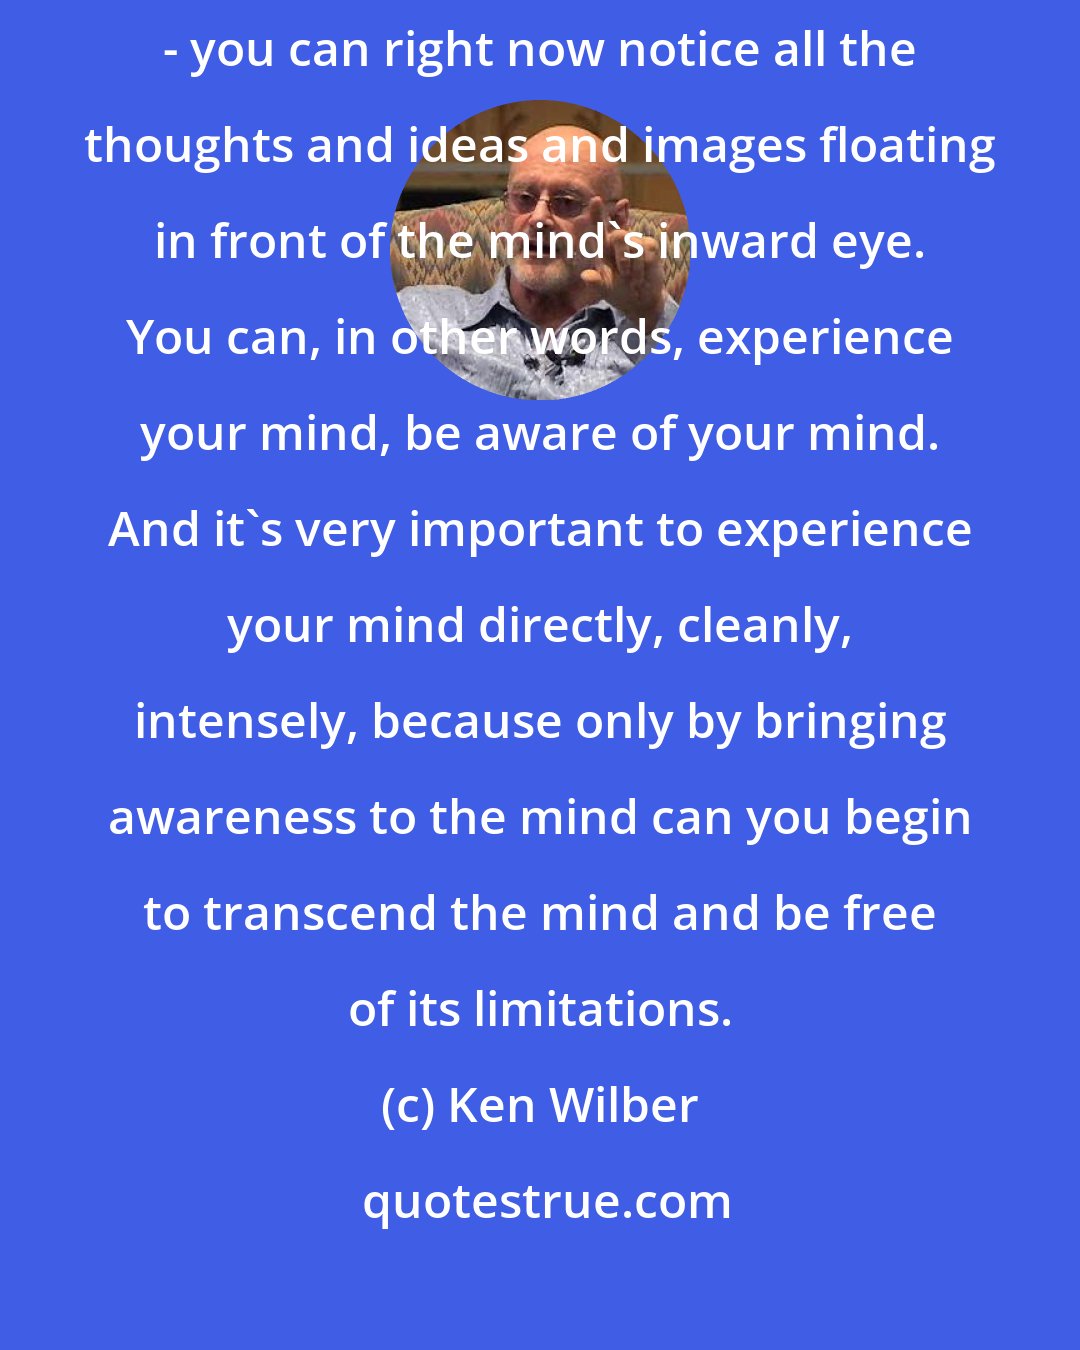 Ken Wilber: You can indeed be aware of your body, but you can also be aware of your mind - you can right now notice all the thoughts and ideas and images floating in front of the mind's inward eye. You can, in other words, experience your mind, be aware of your mind. And it's very important to experience your mind directly, cleanly, intensely, because only by bringing awareness to the mind can you begin to transcend the mind and be free of its limitations.